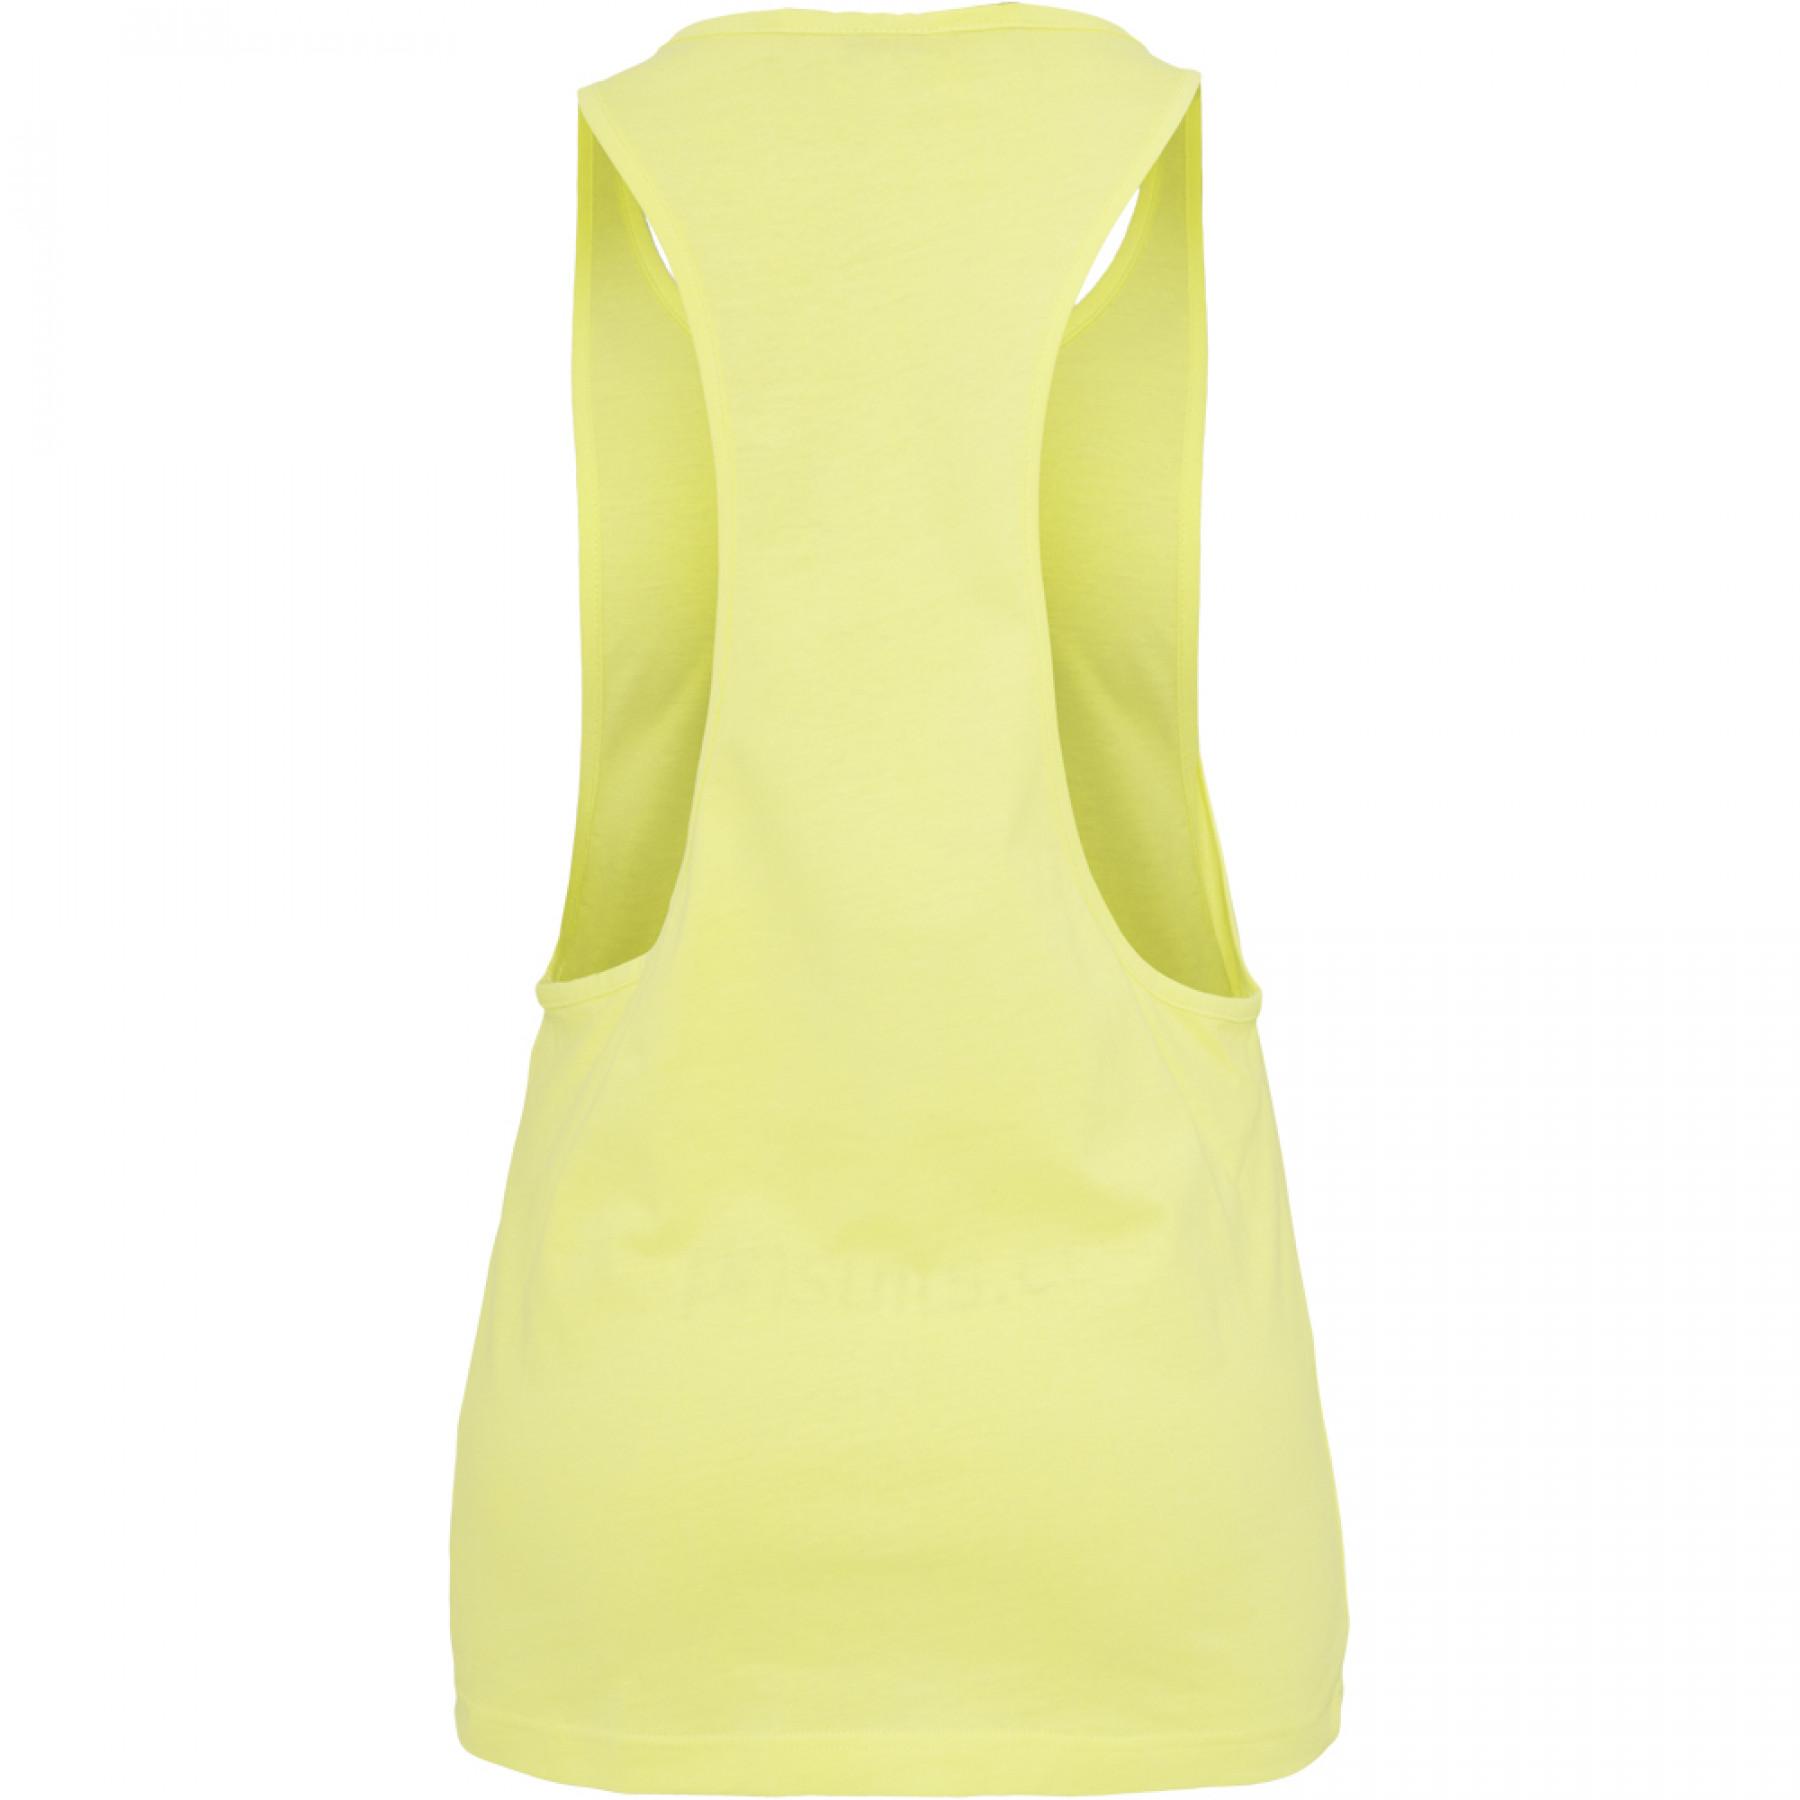 Women\'s Urban Classic loose neon tank top - Others - Brands - Lifestyle